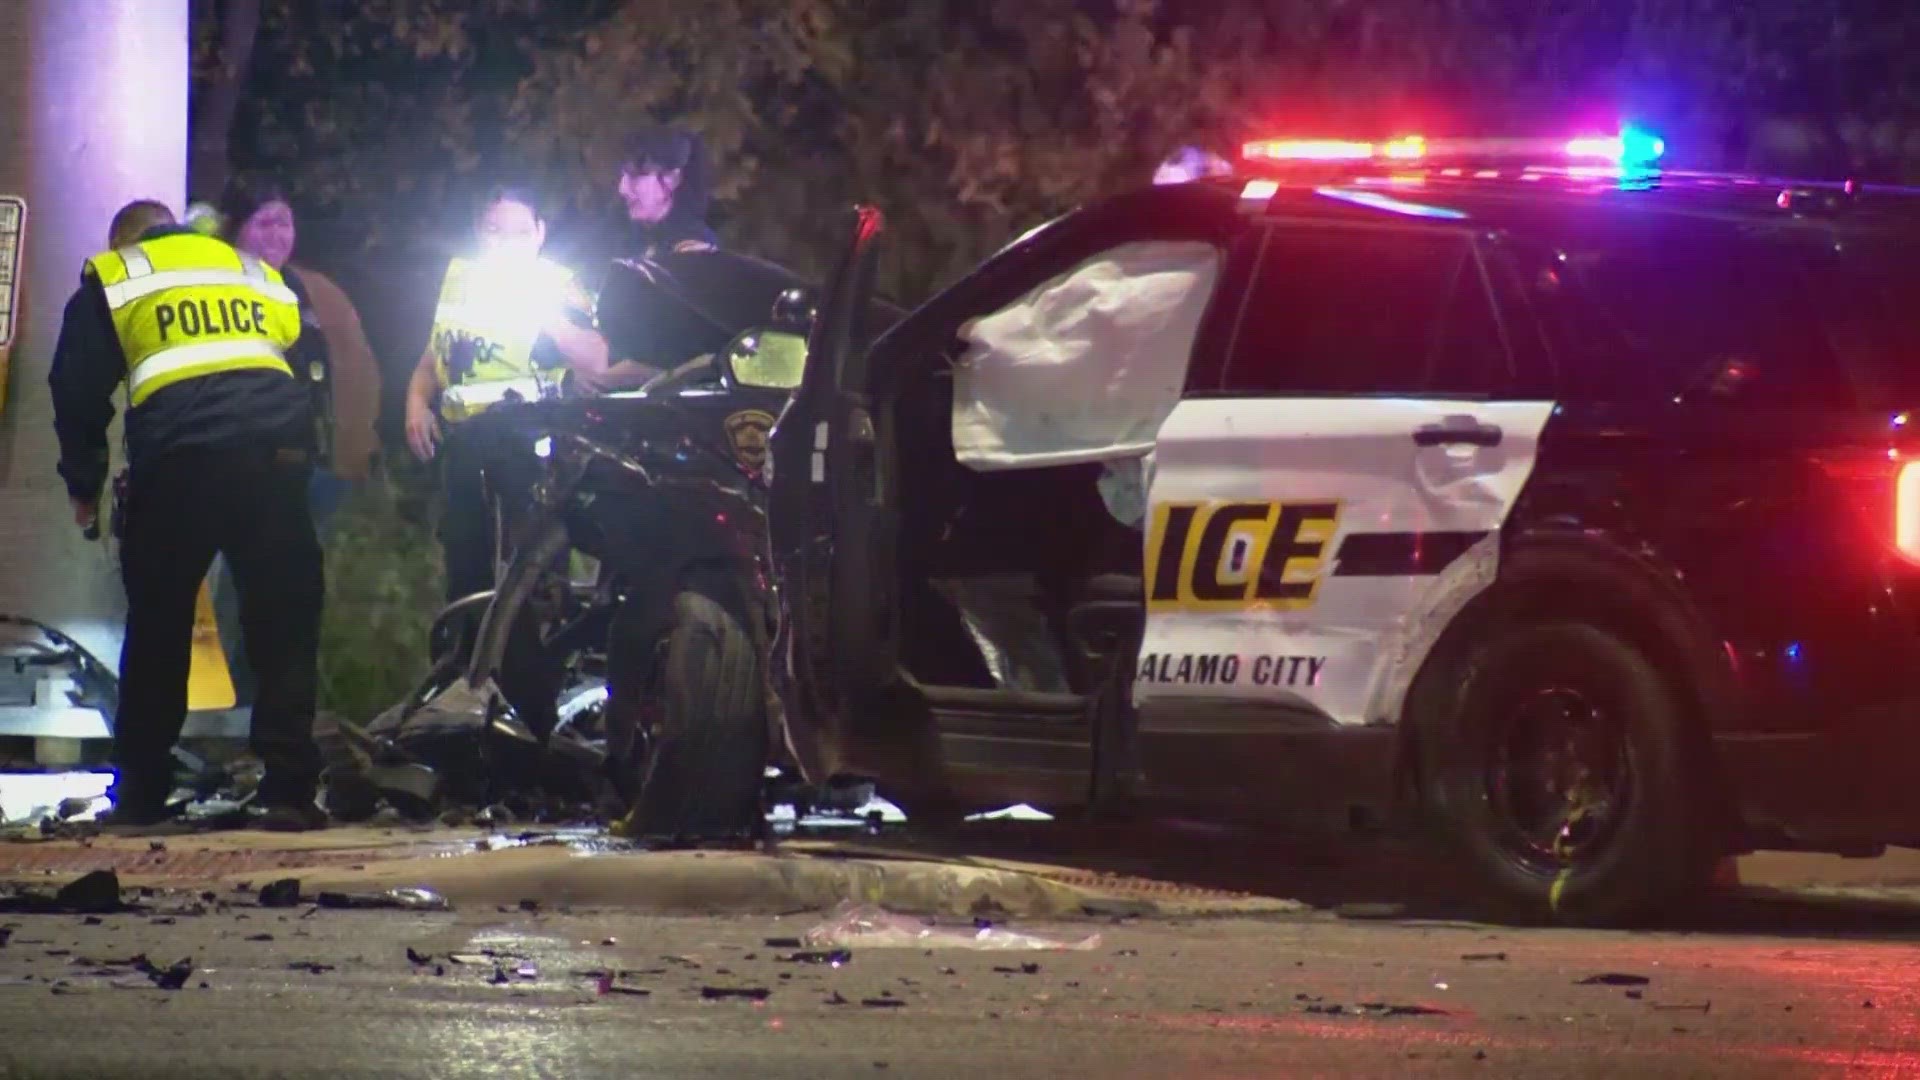 Man saves an officer's life after being hit by an alleged drunk driver